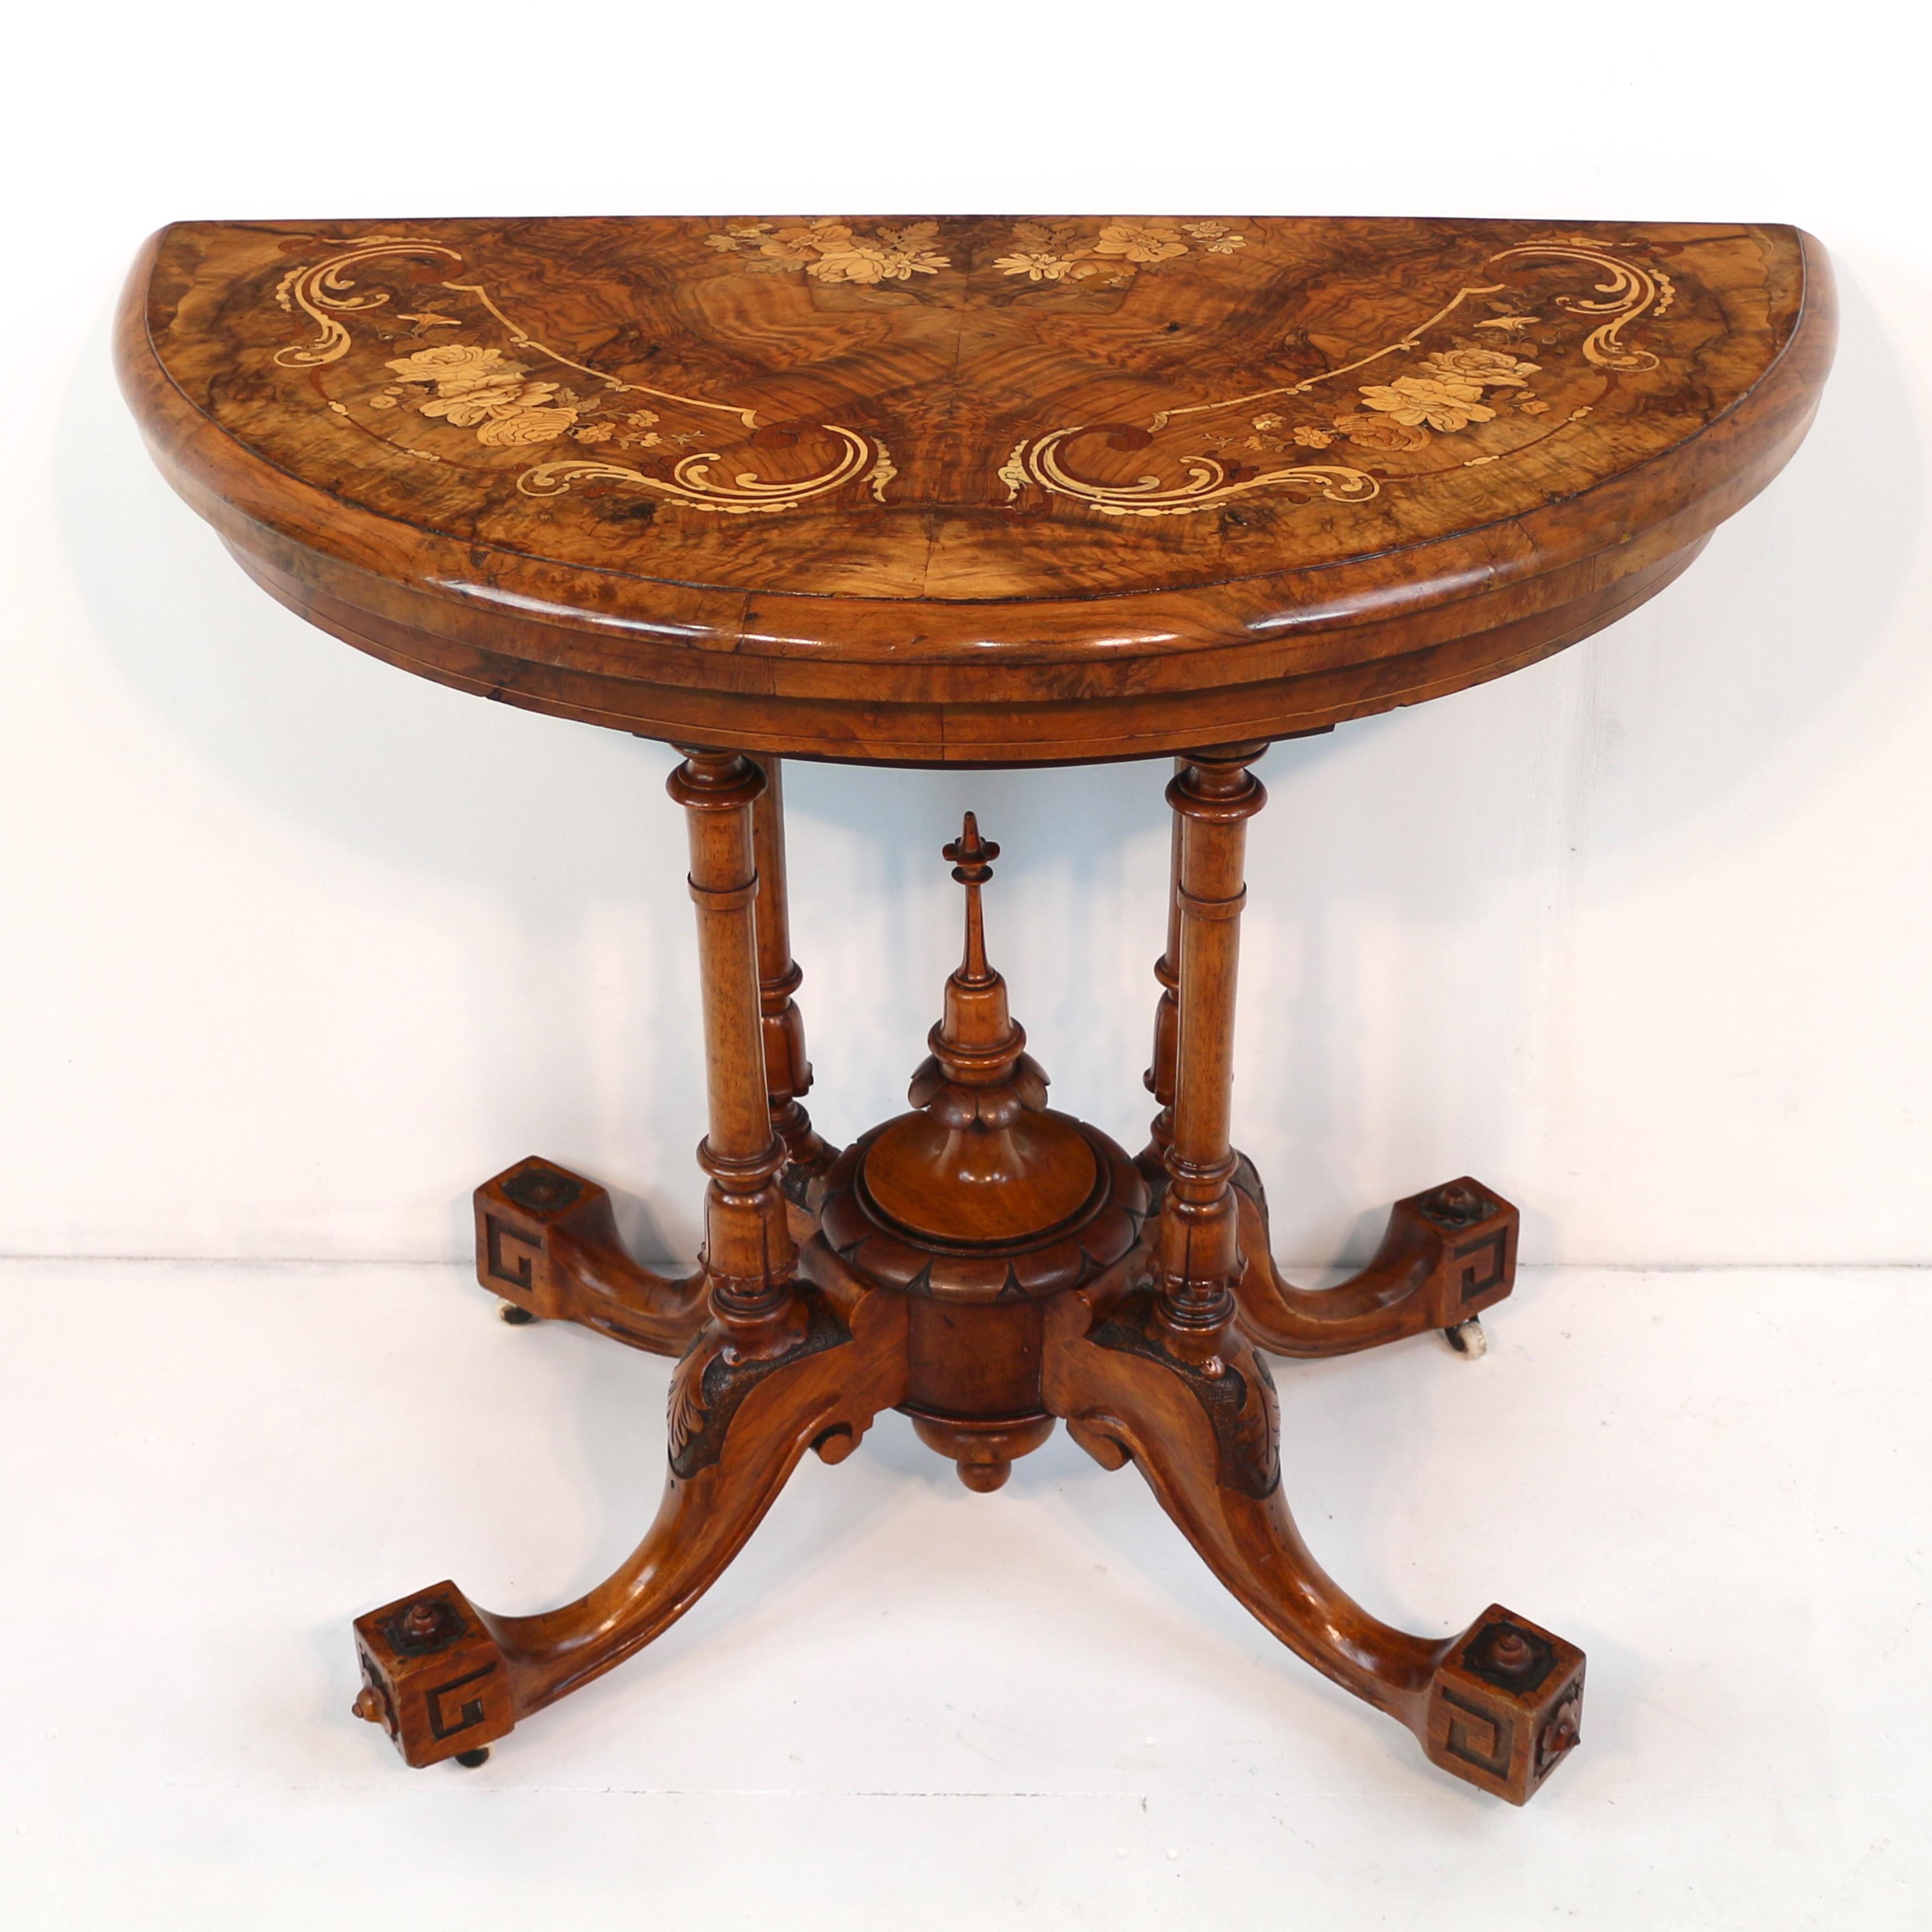 Antique English Victorian Burr Walnut & Floral Marquetry Demi-Lune Card Table For Sale 3